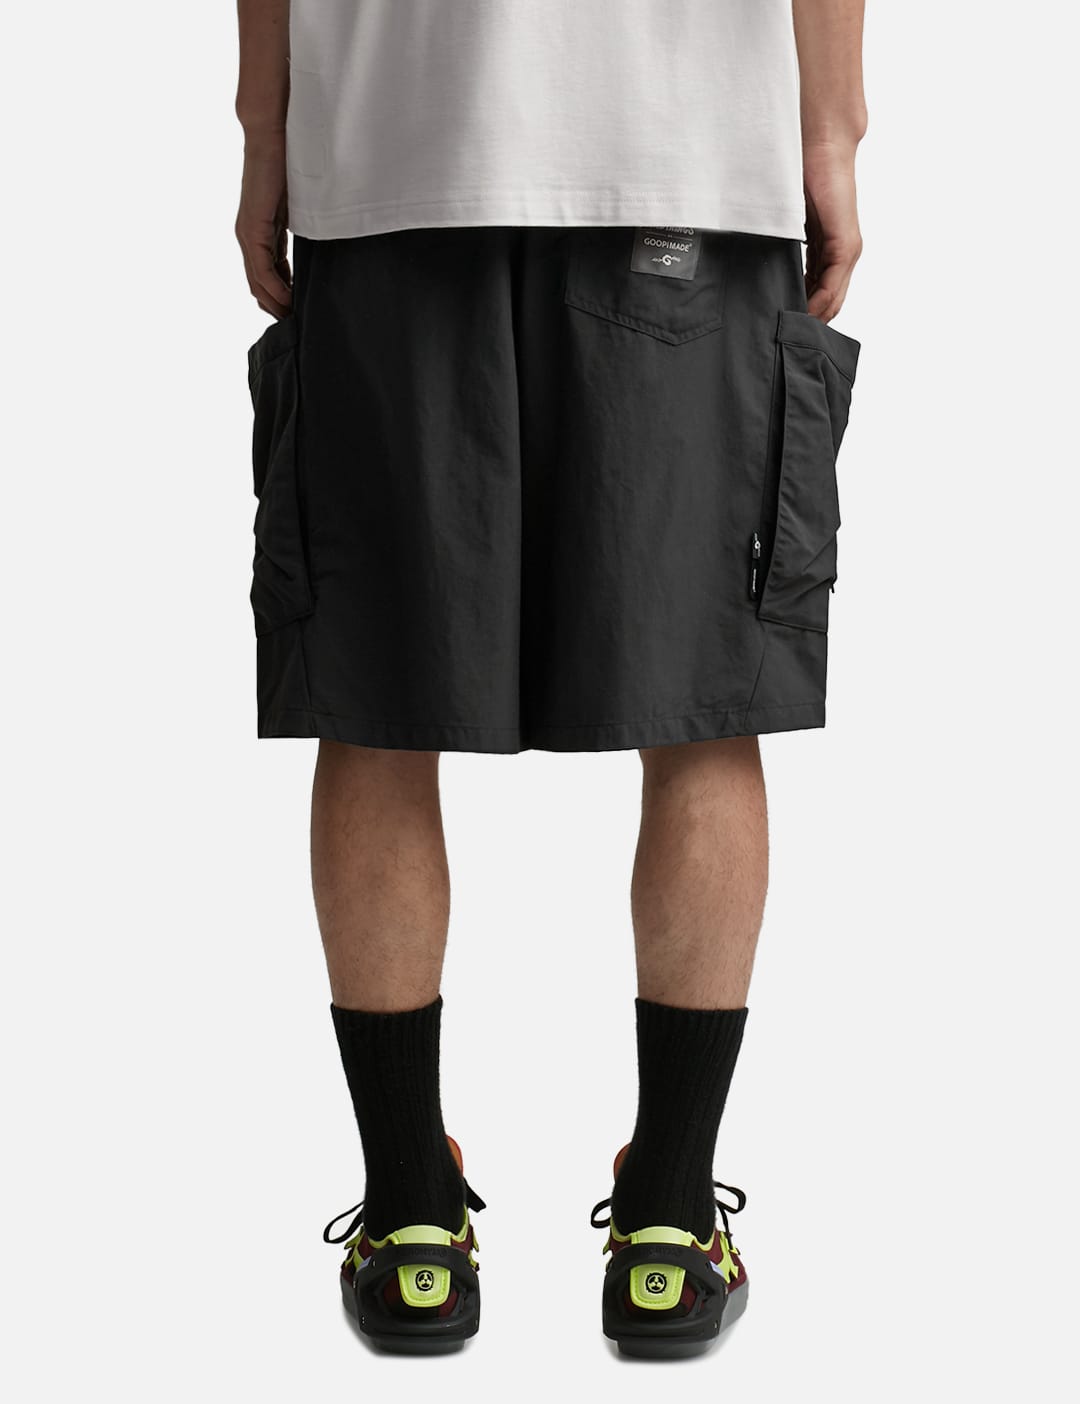 Goopimade ® X Wildthings D string Utility Shorts In Black   ModeSens